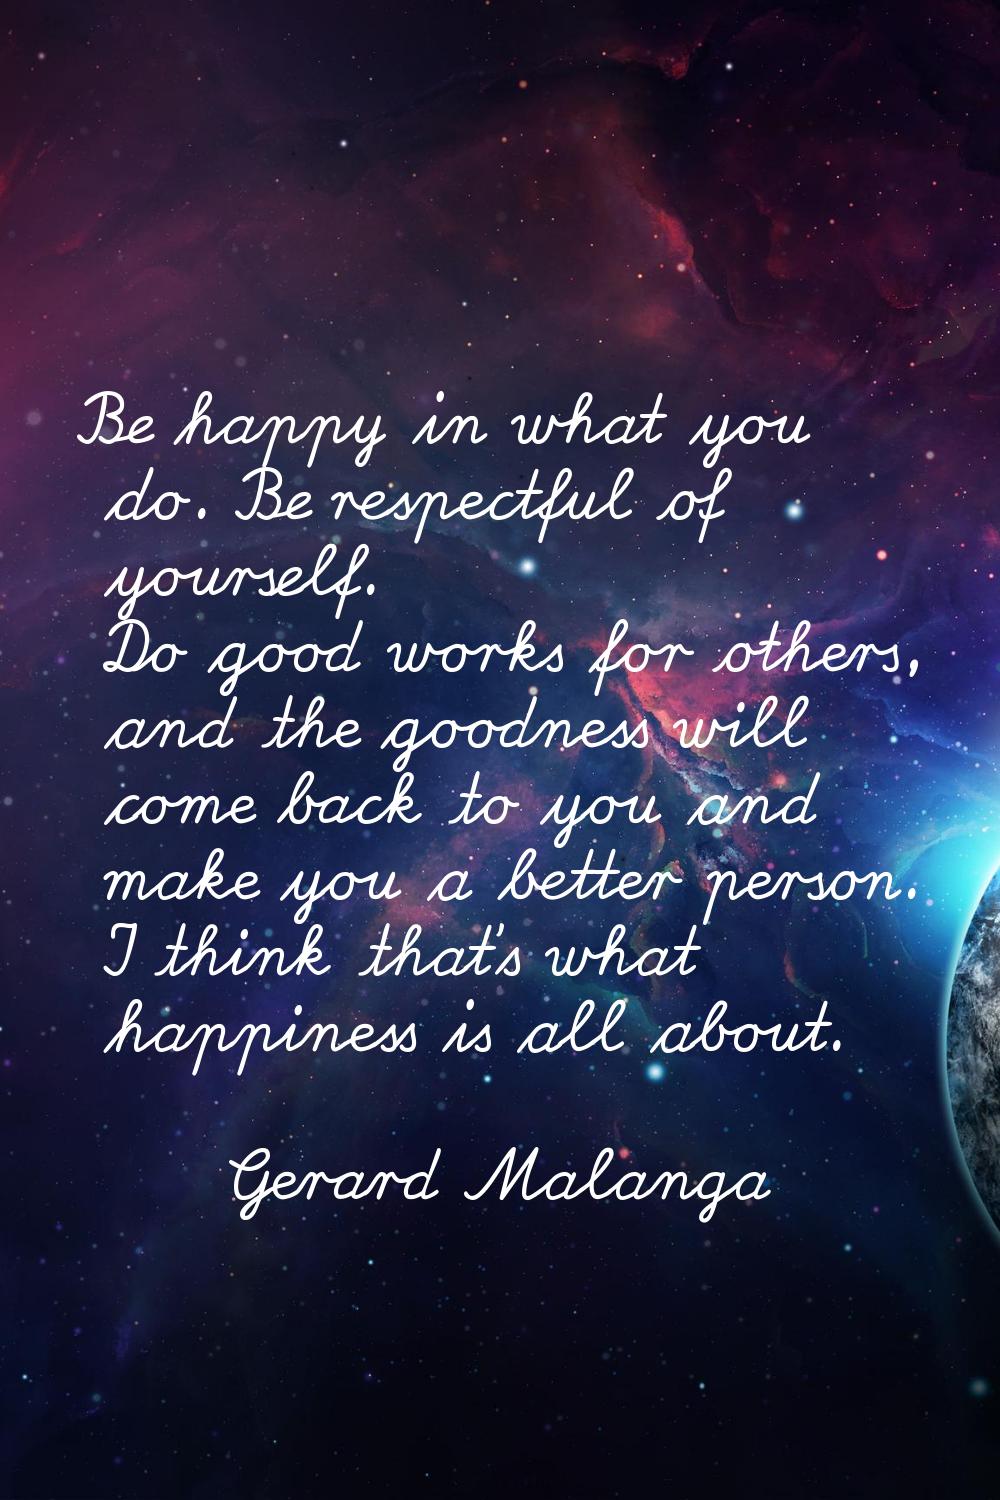 Be happy in what you do. Be respectful of yourself. Do good works for others, and the goodness will